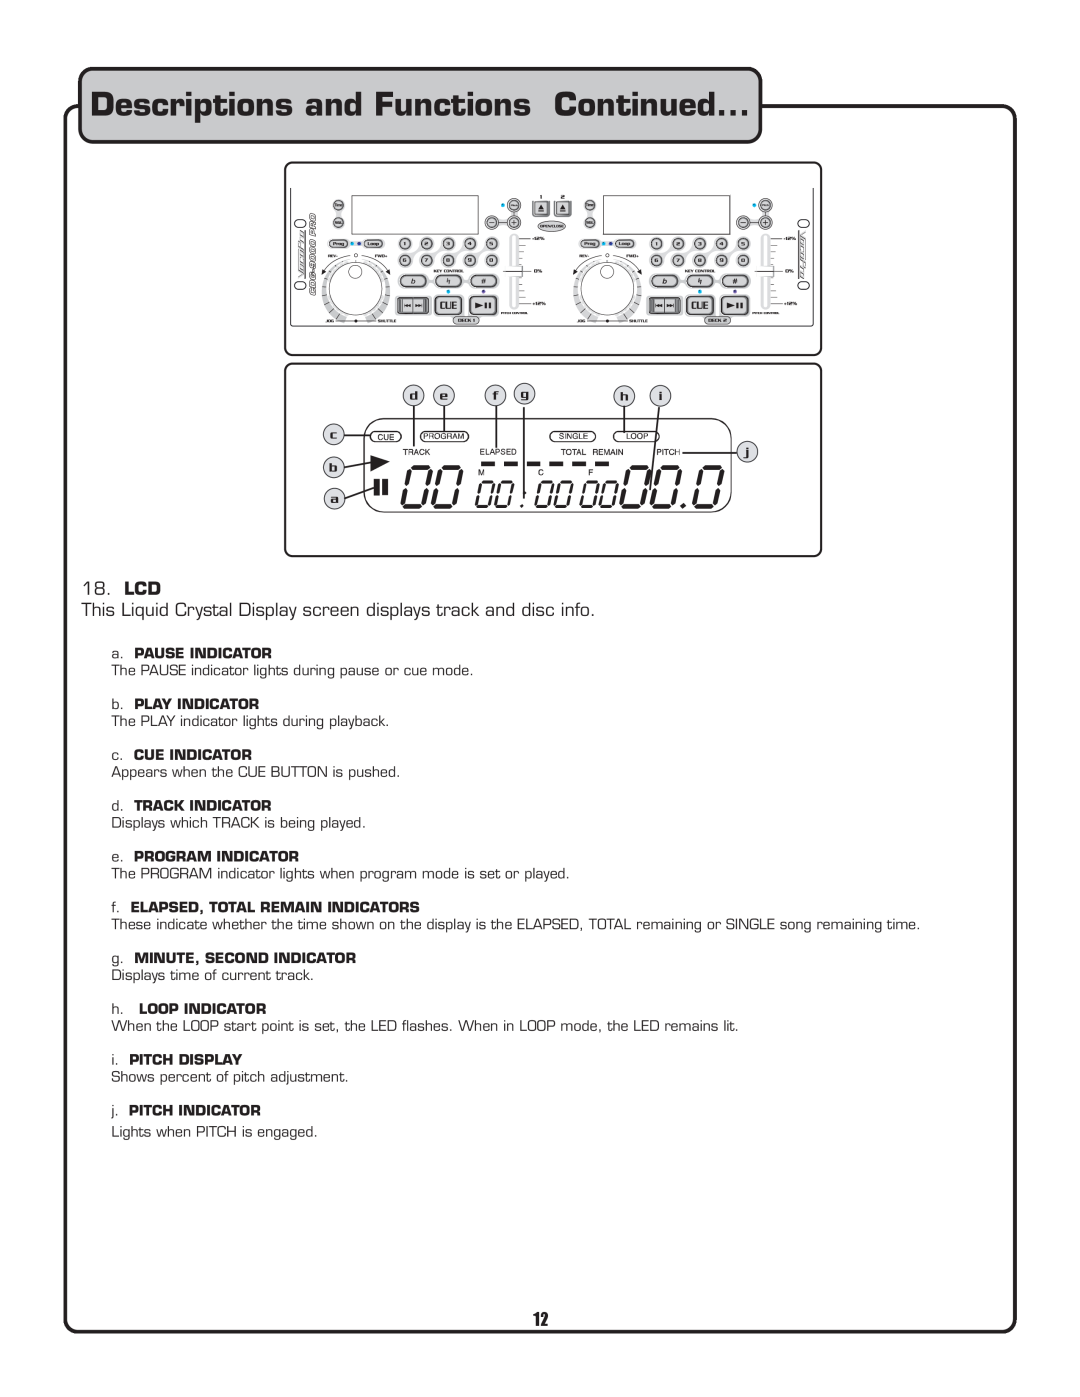 VocoPro CDG-9000 owner manual Descriptions and Functions Continued, 18.LCD 